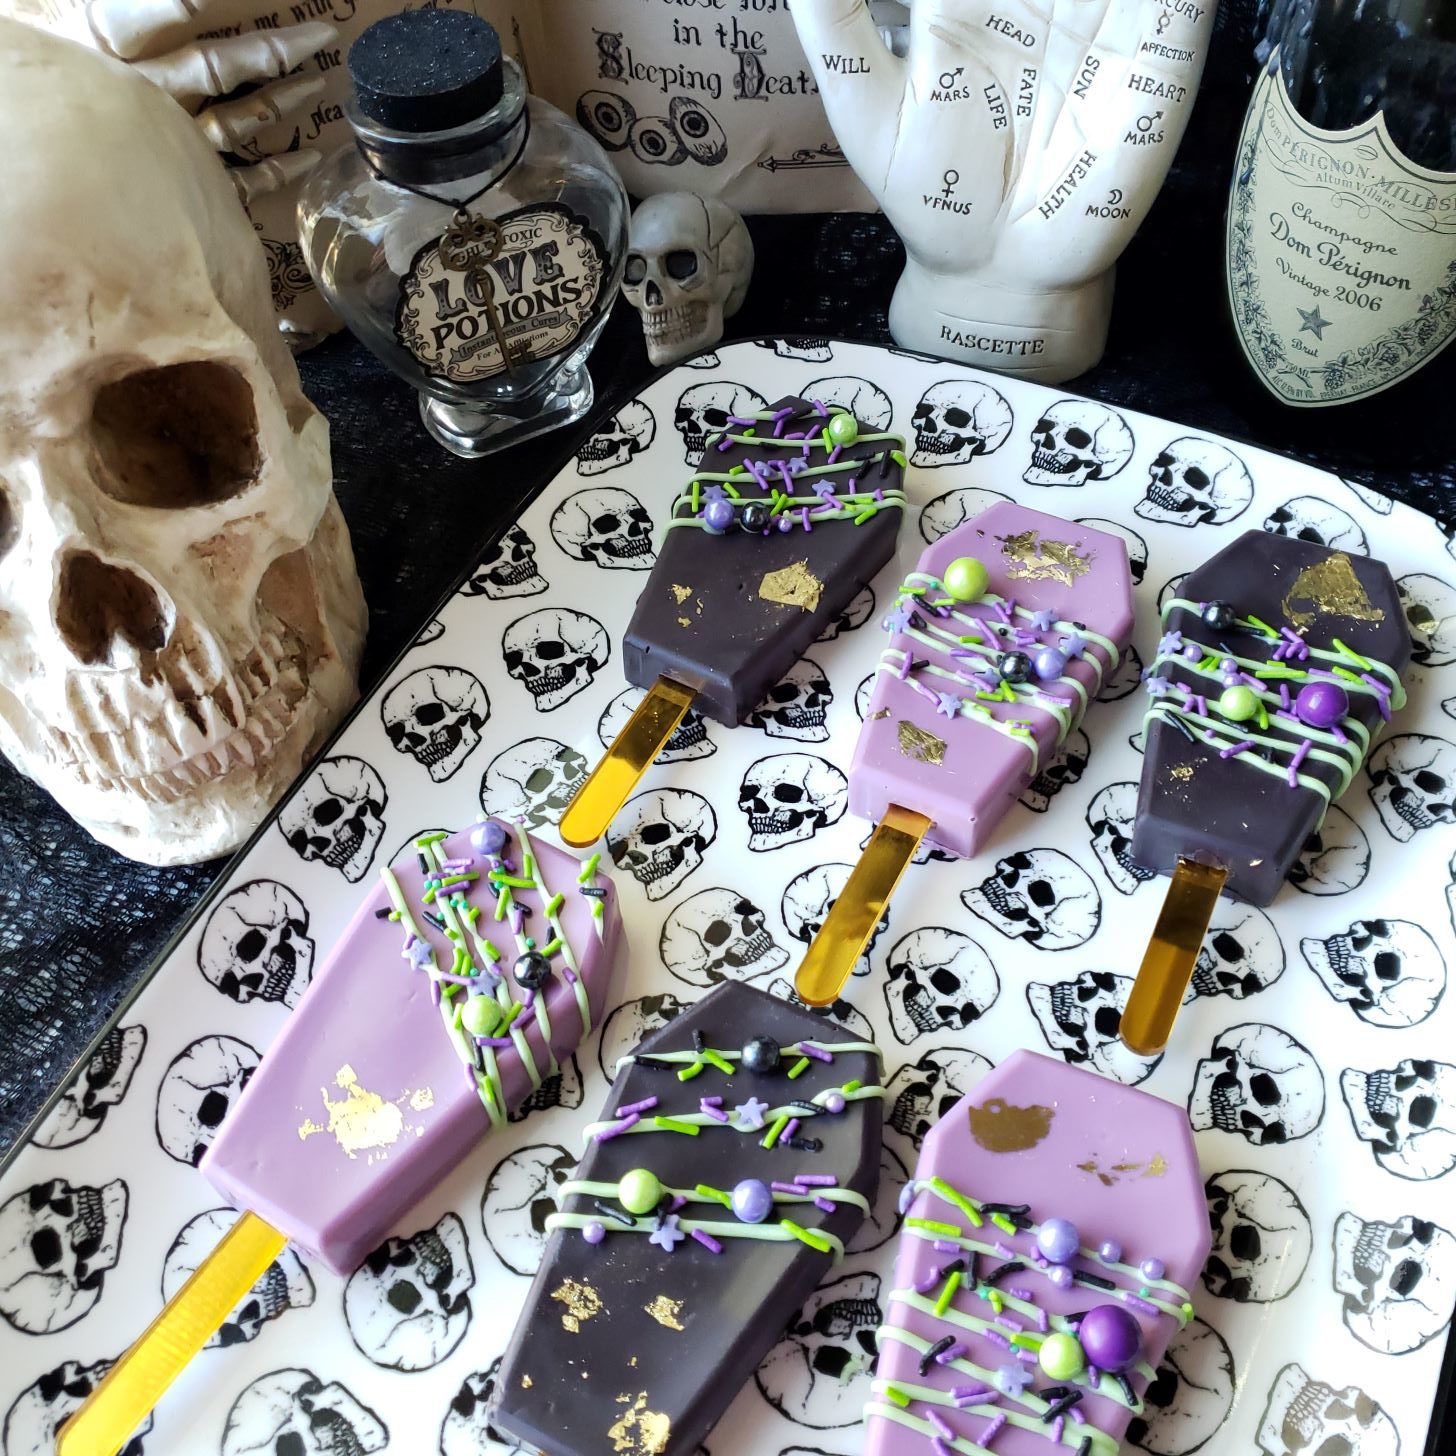 https://paperstreetparlour.com/wp-content/uploads/2022/09/coffin-cakesicle-square-rotated.jpg